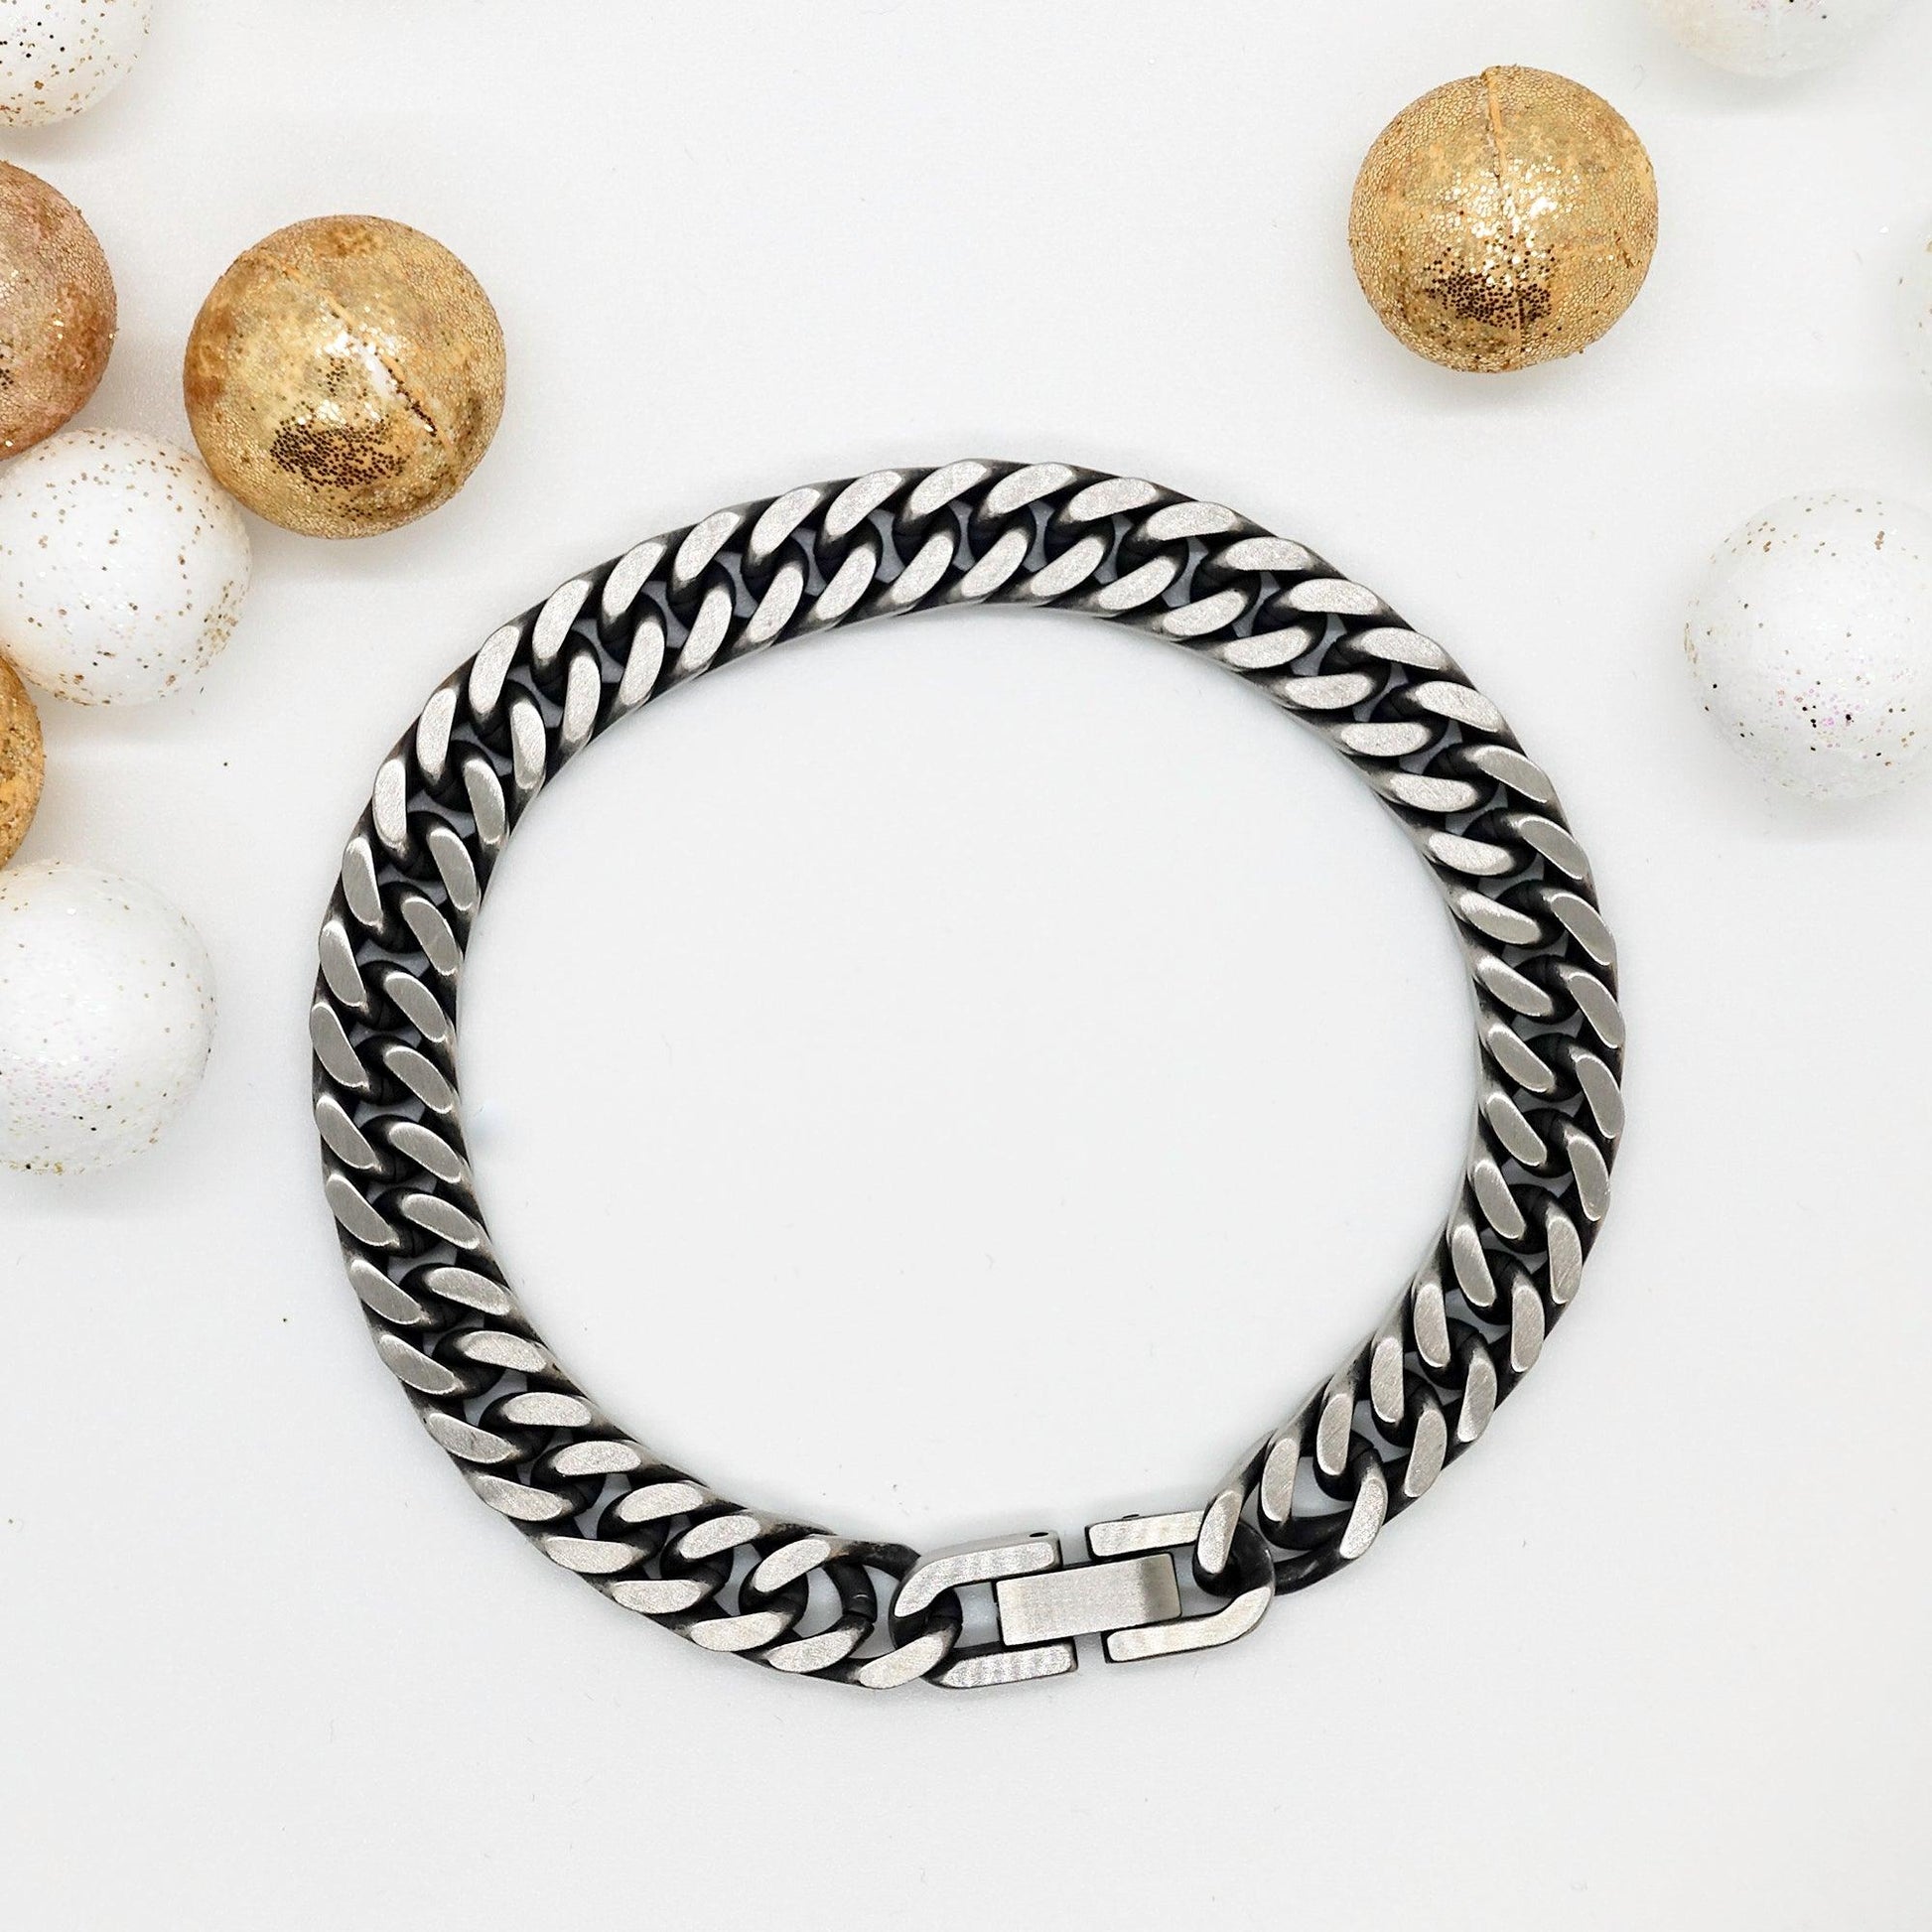 Remarkable Missionary Gifts, Your dedication and hard work, Inspirational Birthday Christmas Unique Cuban Link Chain Bracelet For Missionary, Coworkers, Men, Women, Friends - Mallard Moon Gift Shop